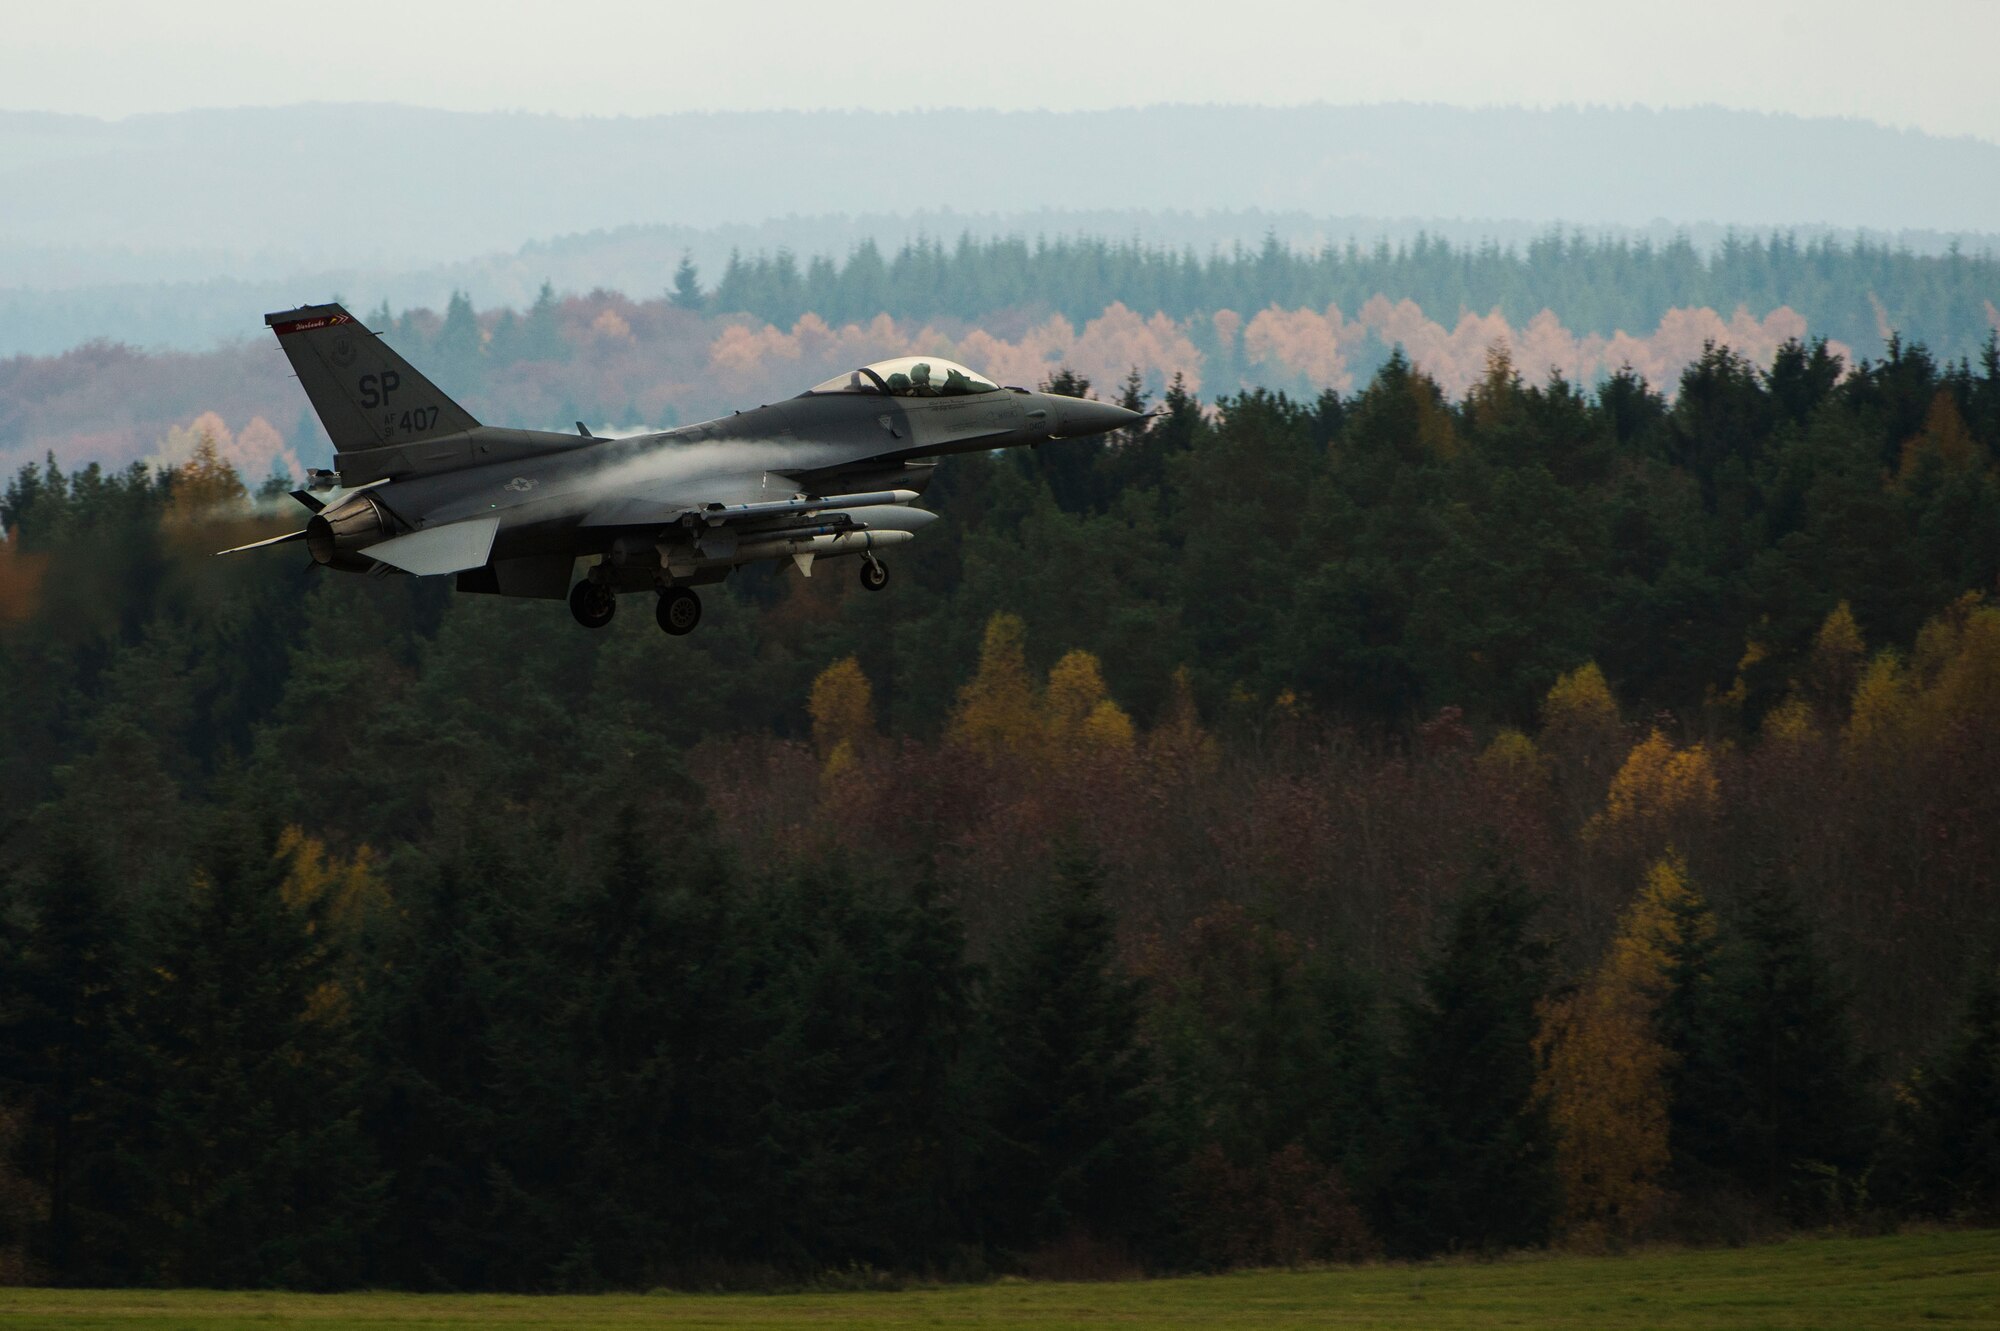 A U.S. Air Force pilot assigned to the 480th Fighter Squadron prepares to land an U.S. Air Force F-16 Fighting Falcon fighter aircraft Nov. 6, 2015, at Spangdahlem Air Base, Germany. The F-16s return from Trident Juncture, an annual NATO response force certification exercise. (U.S. Air Force photo by Staff Sgt. Christopher Ruano/Released)